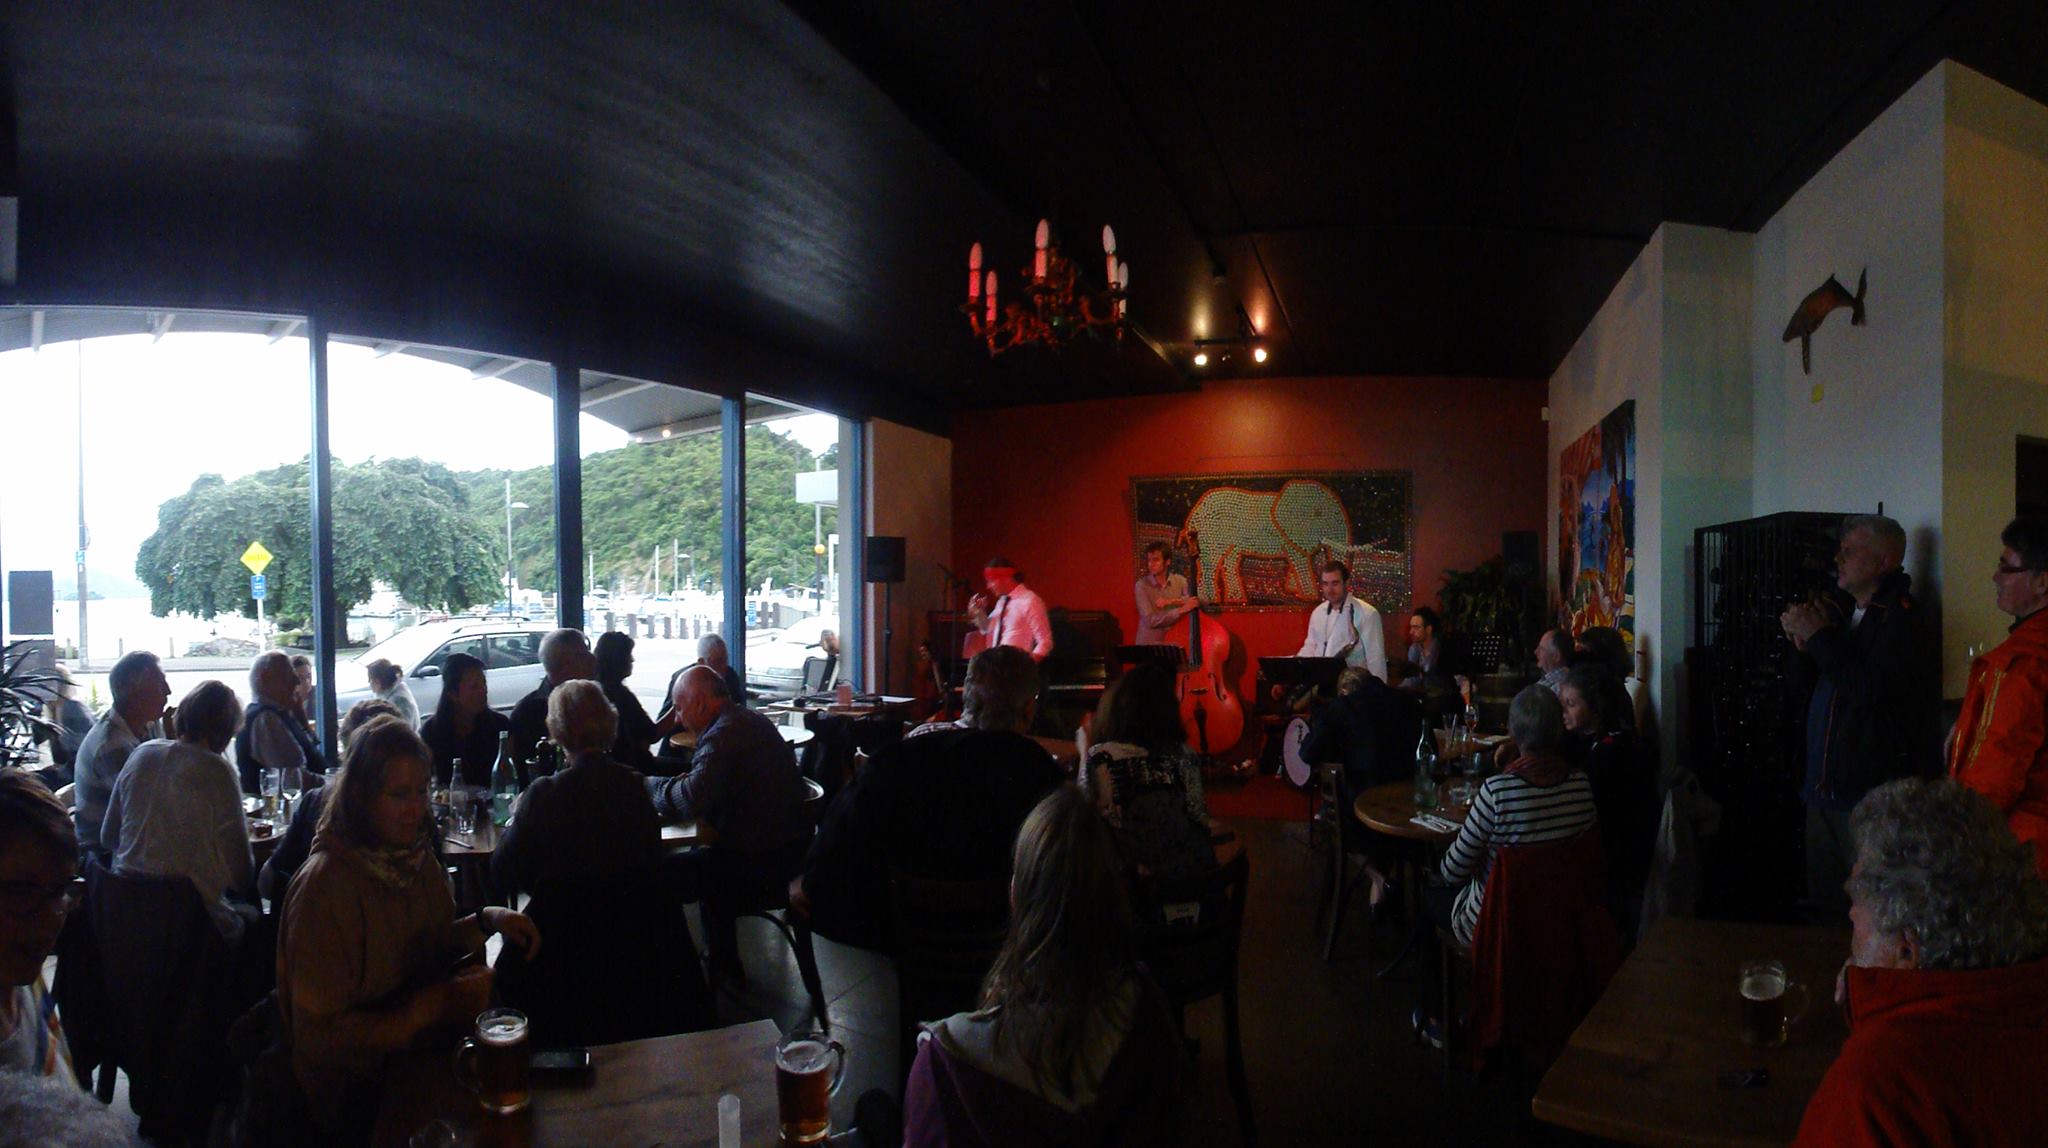 Mike Field at Le Café in Picton, New Zealand